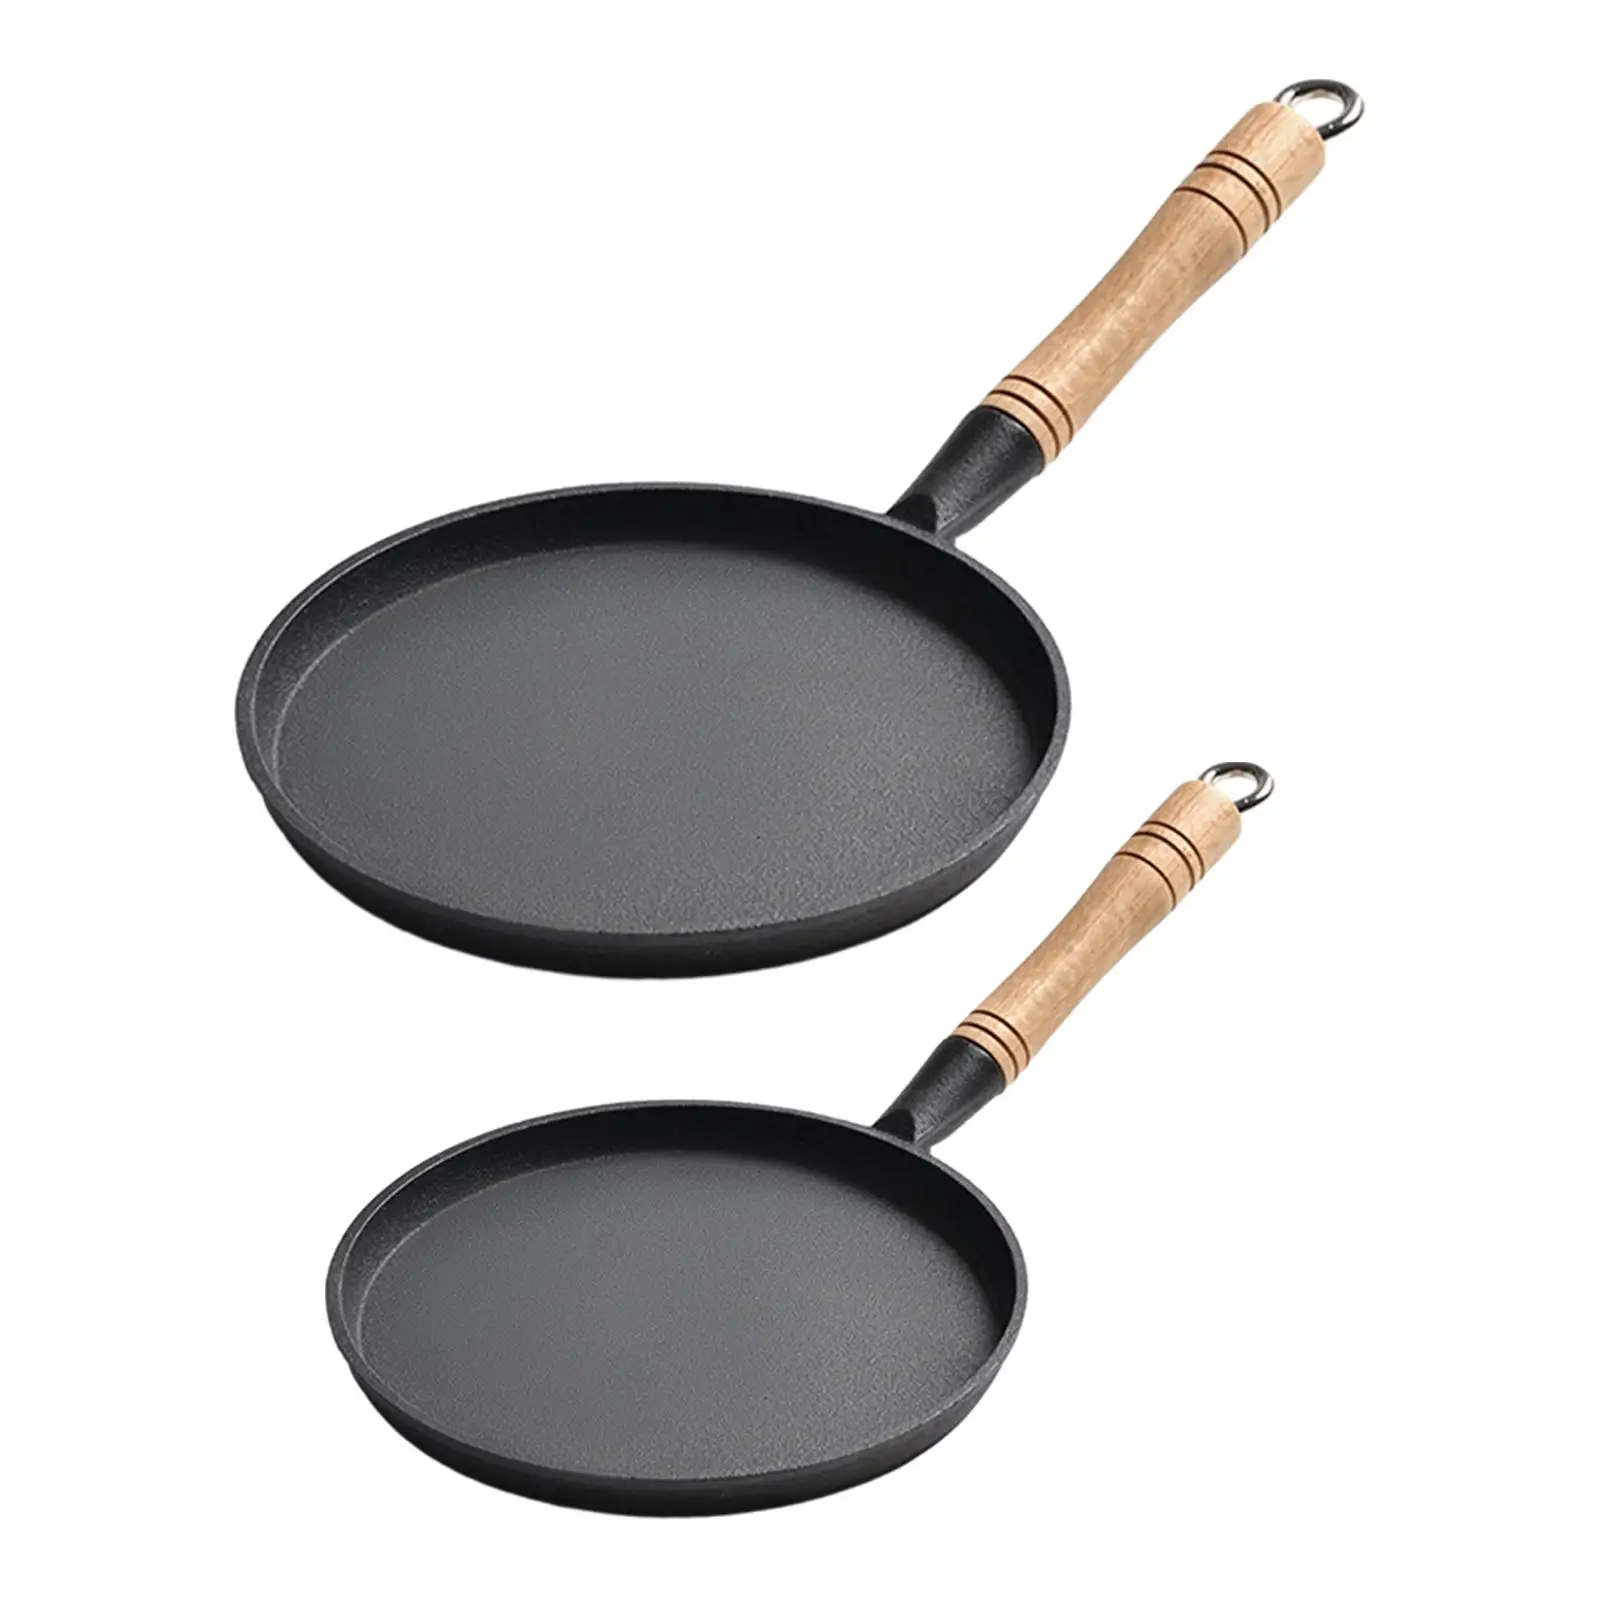 Cooking Omelette Pan Nonstick Round Griddle Pan for Kitchen Outdoor Camping